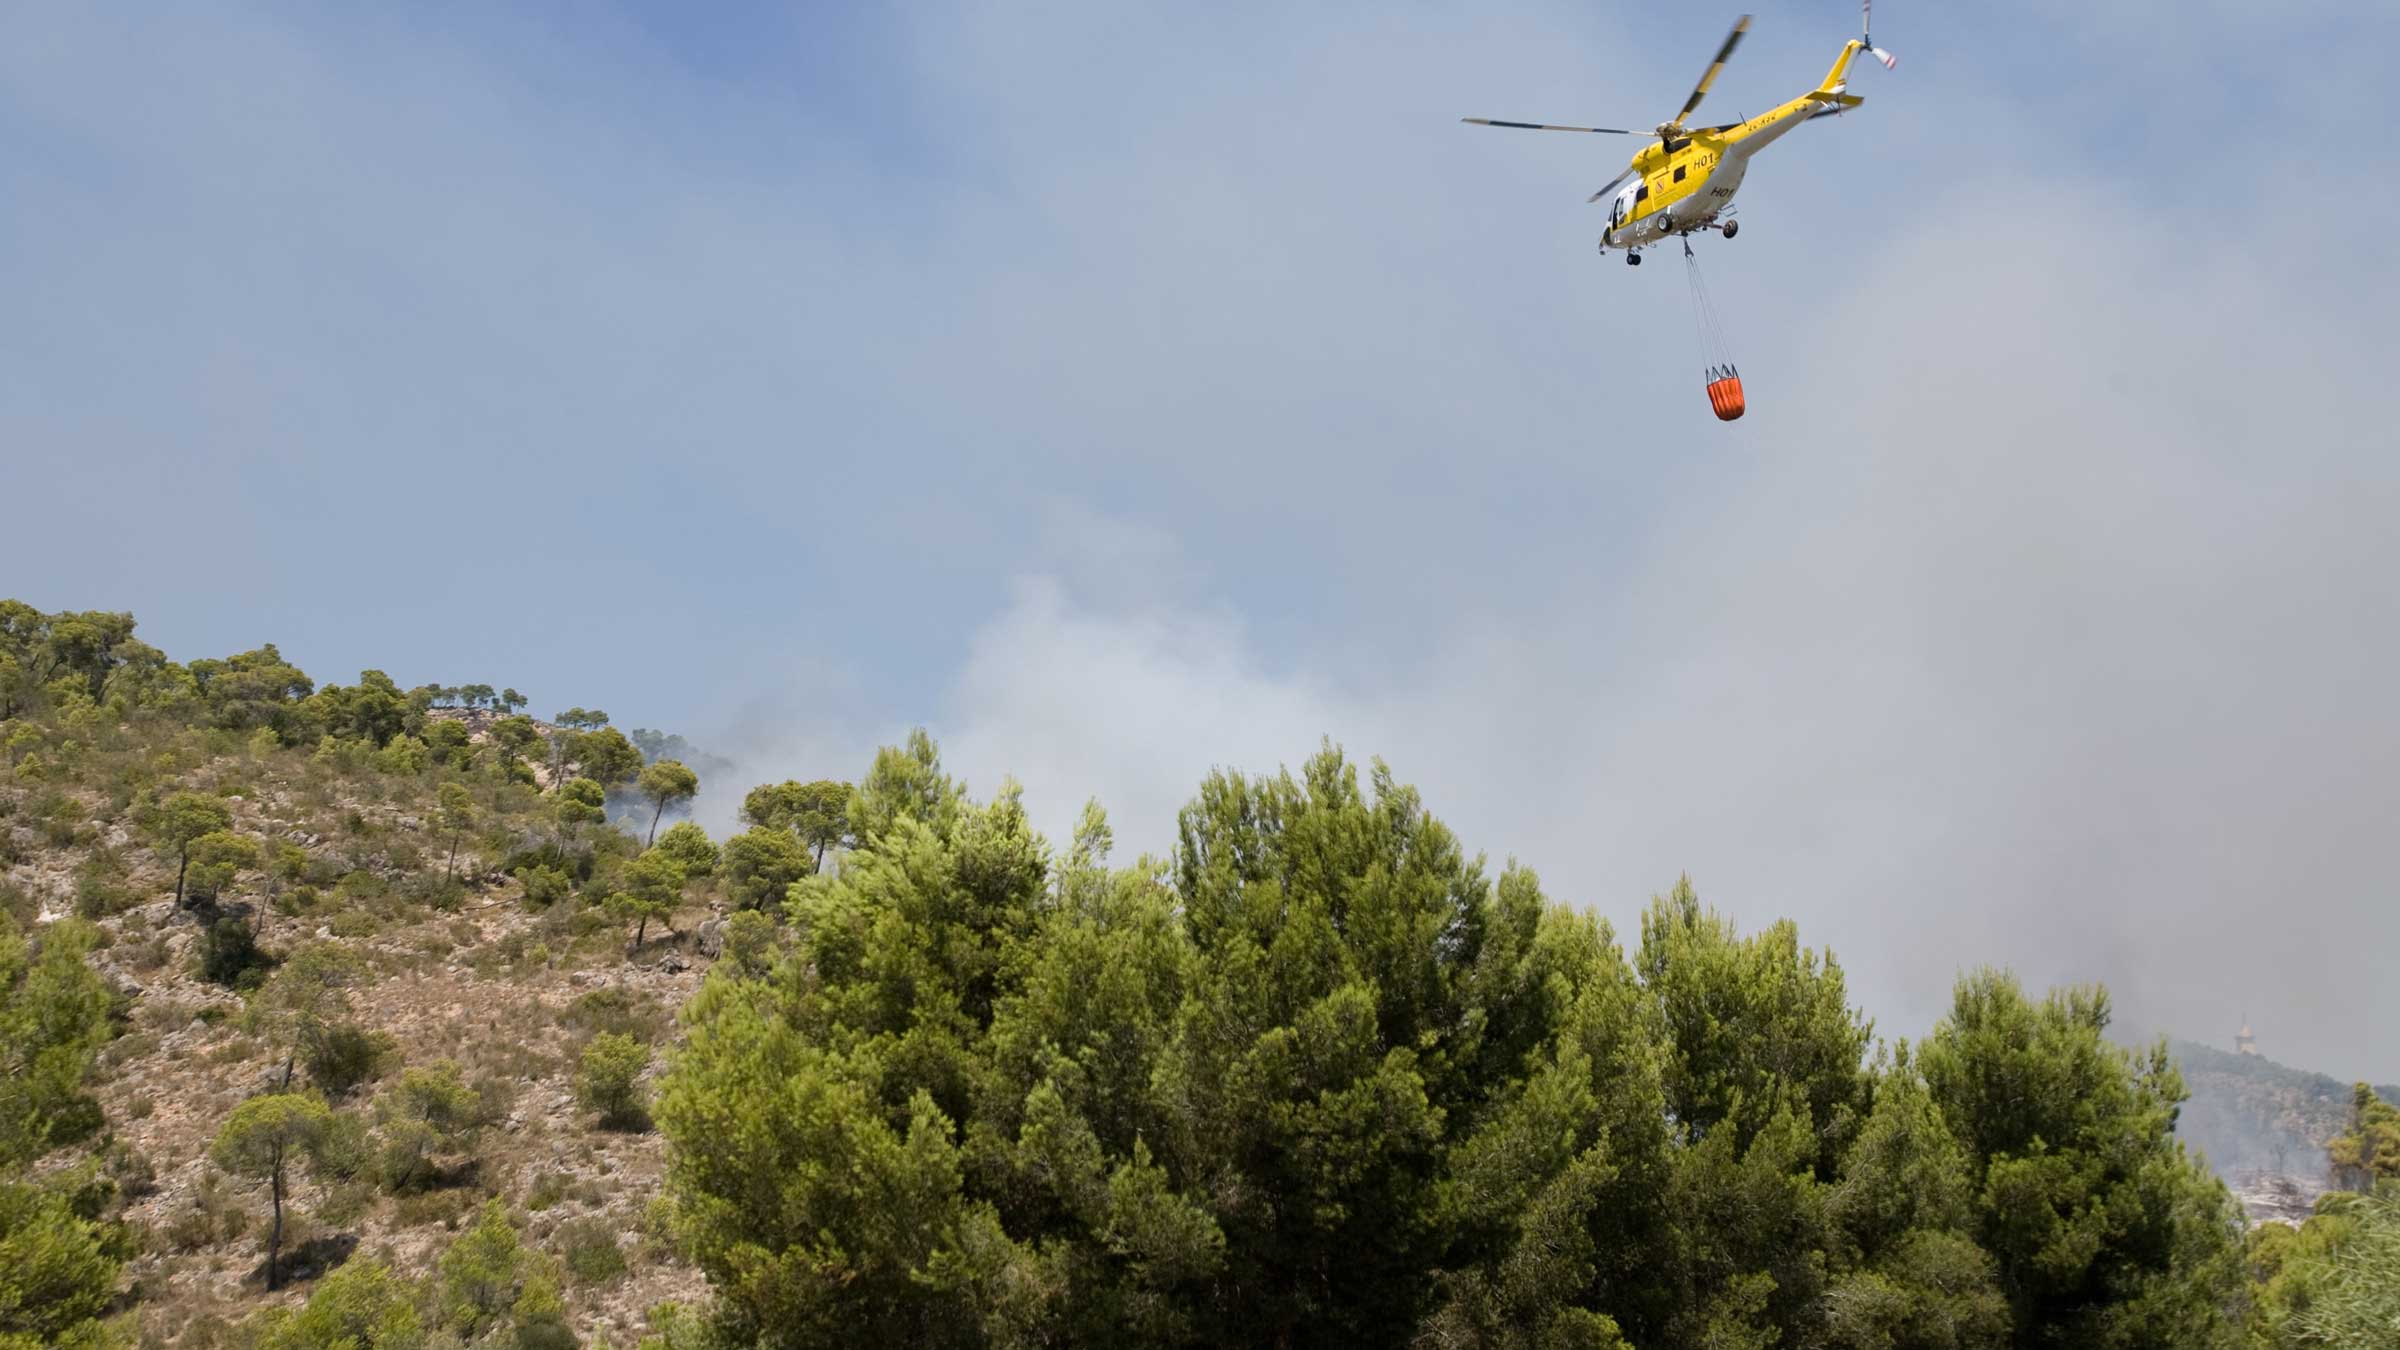 A helicopter dousing flames over a forest fire in Spain